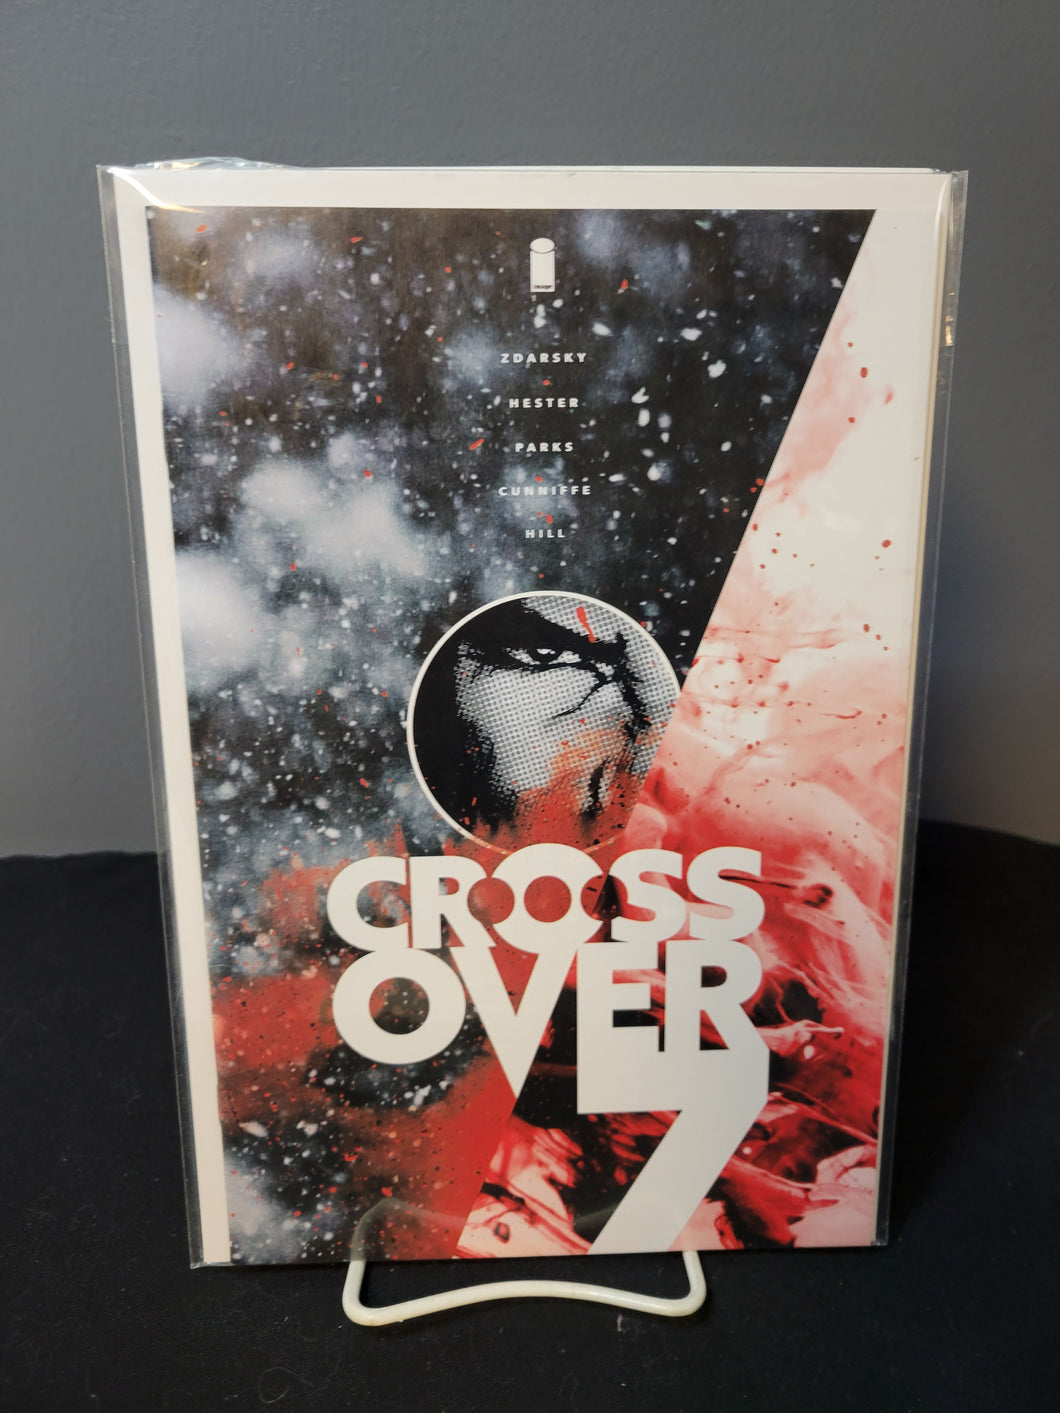 Crossover 7 1:50 Ratio Variant